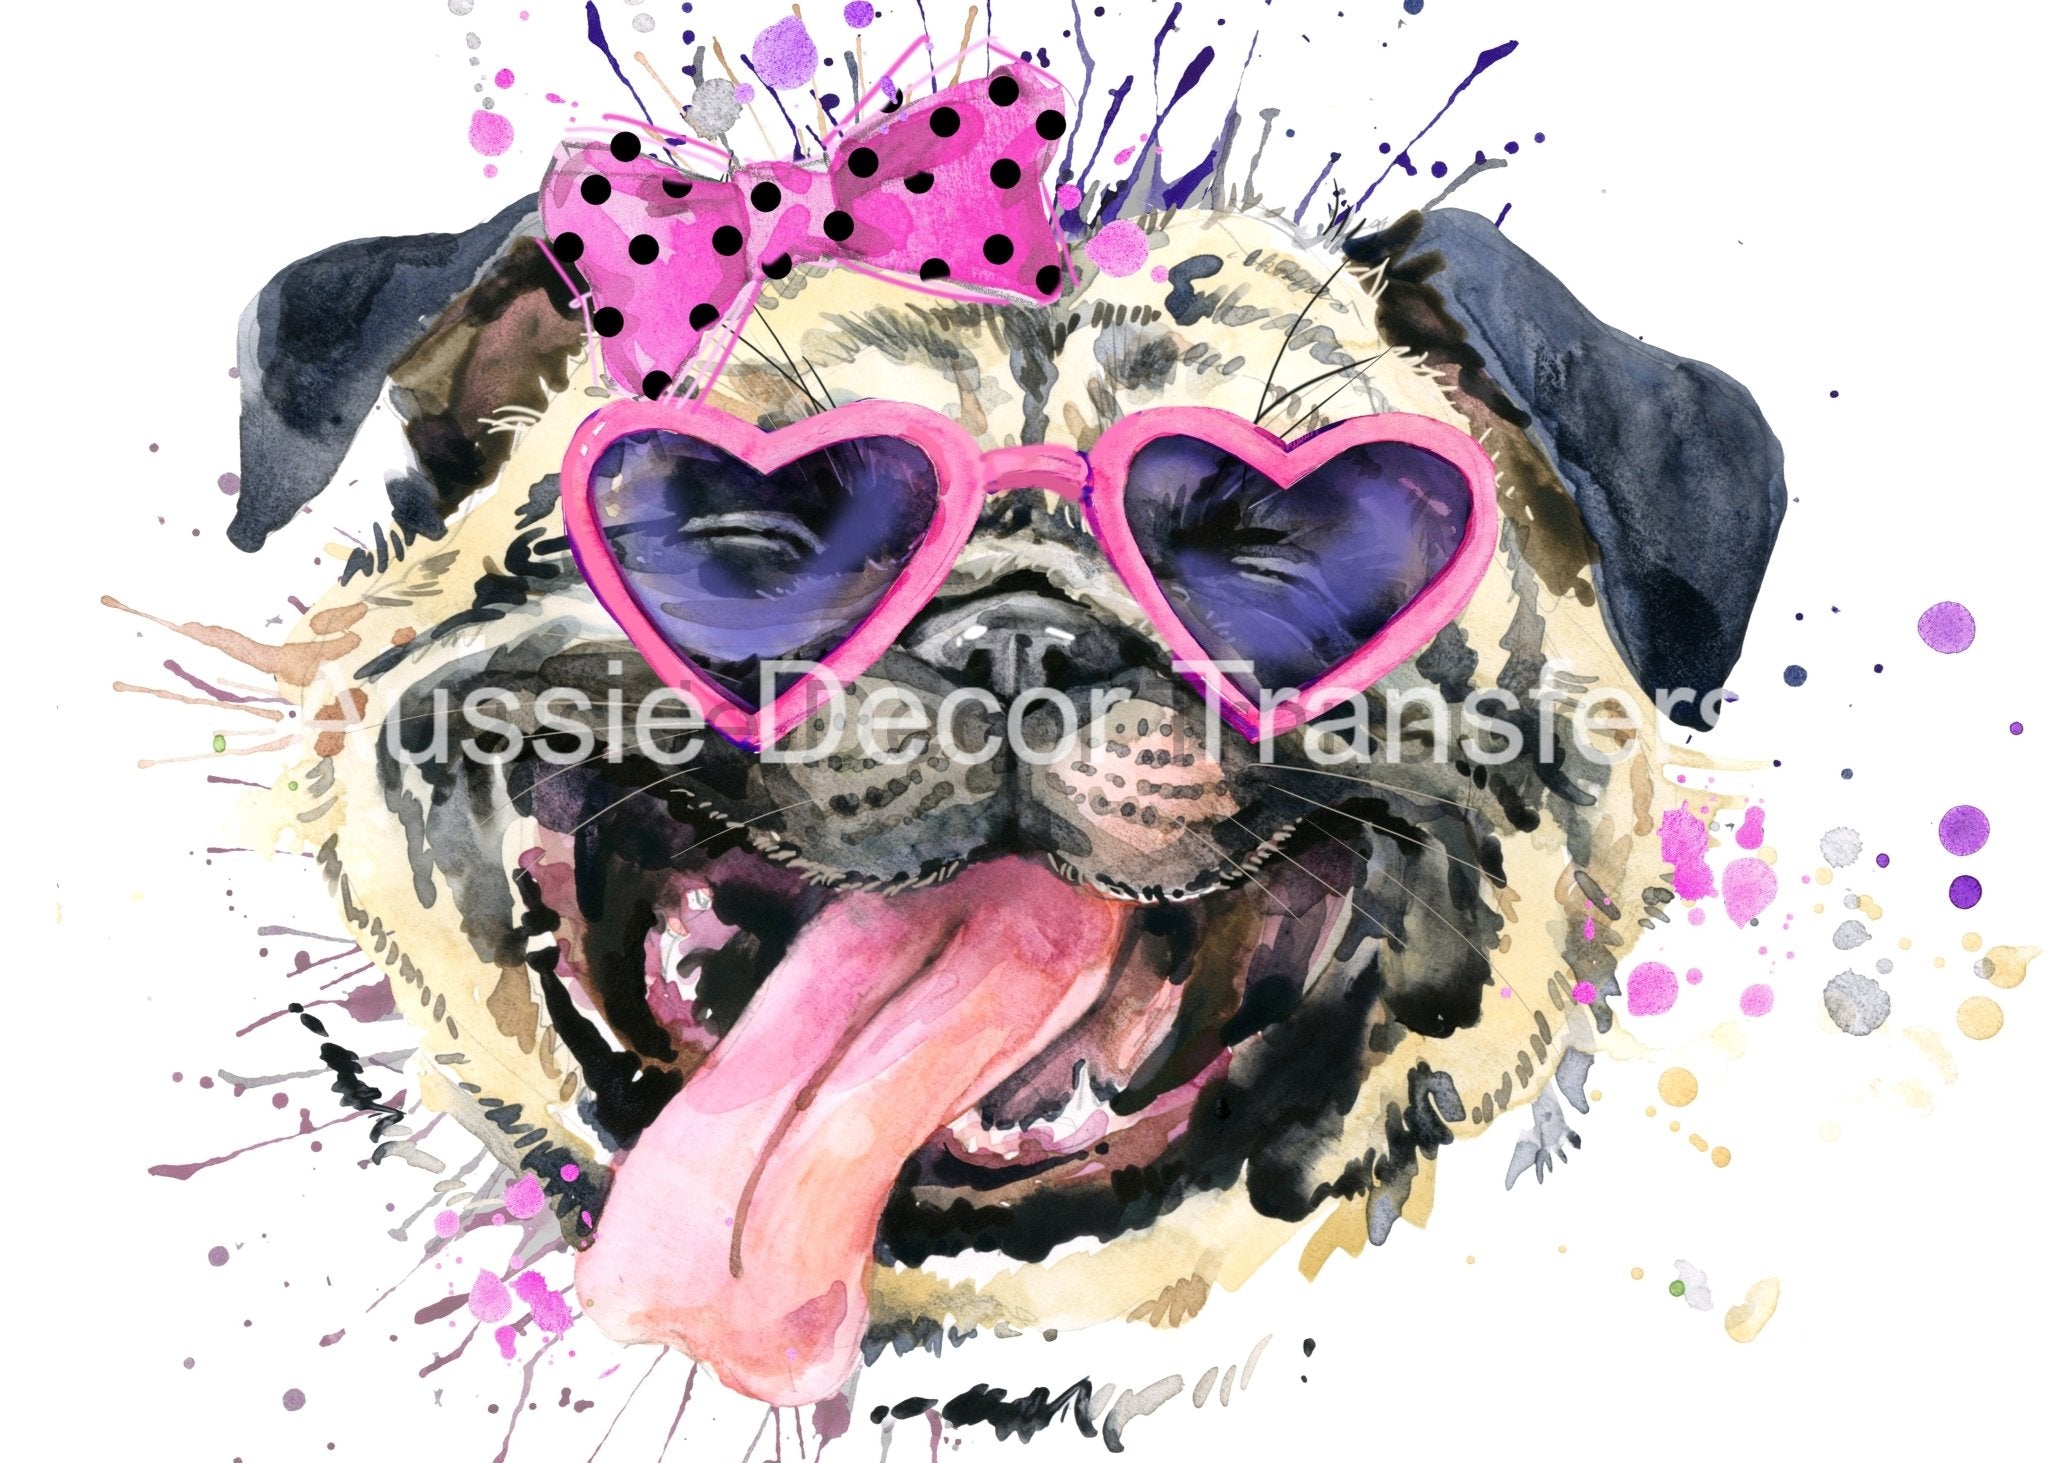 Aussie Decor Transfers Poster Print Girl Pug in Sunnies - Not Your Average Poster Print! - AUS ONLY